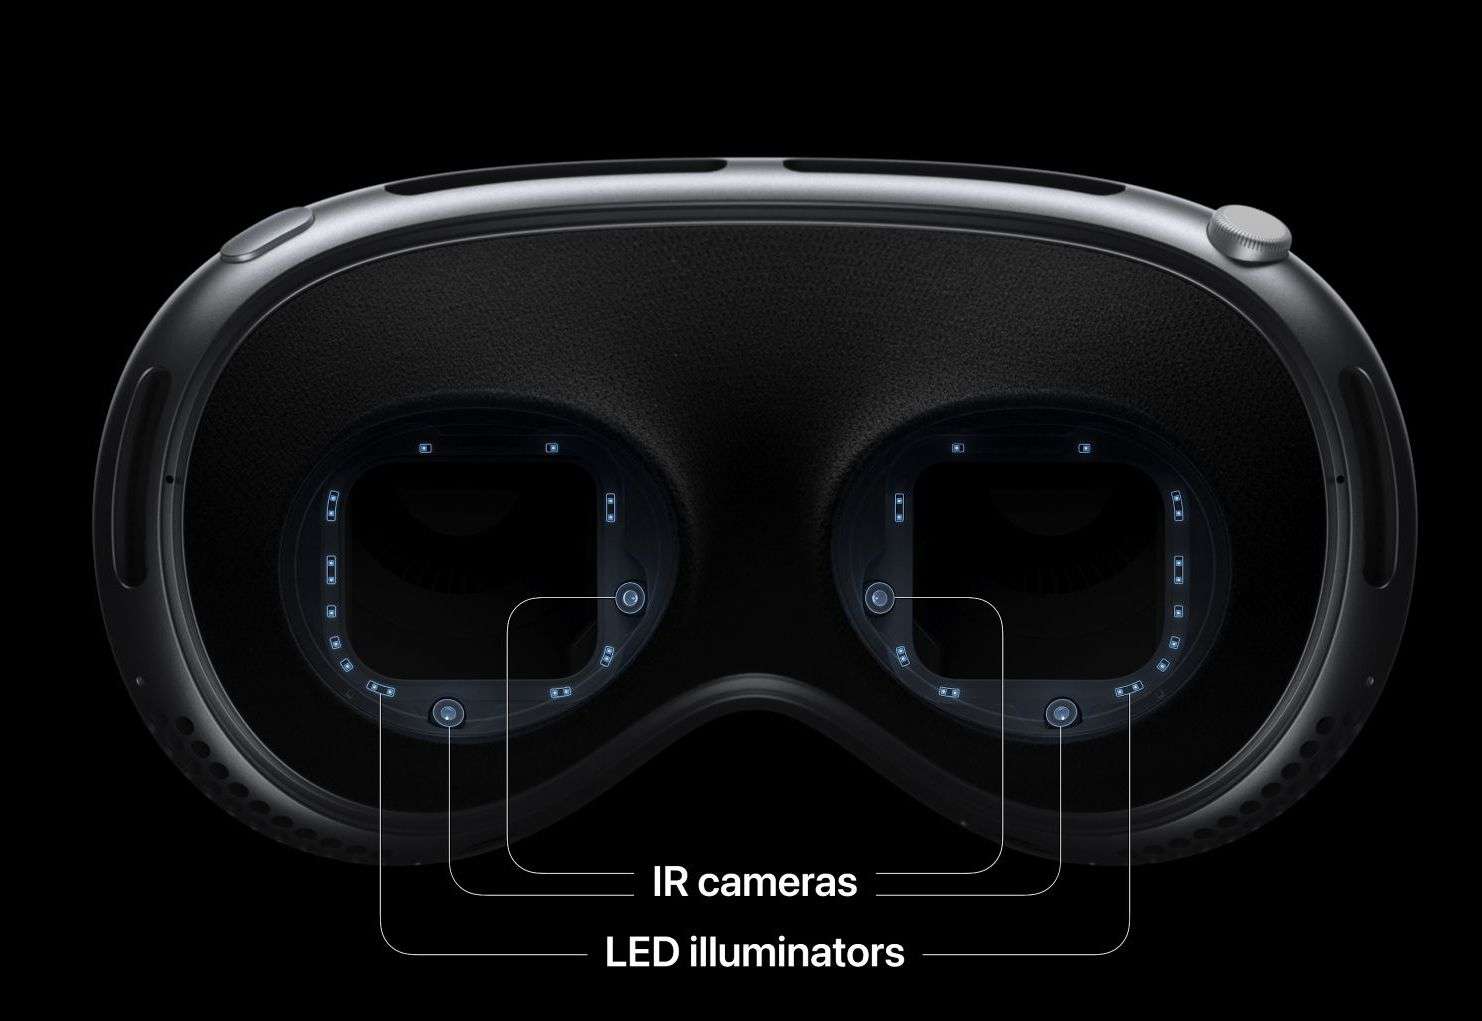 Close-up image of the advanced Infrared (IR) sensor technology used in Apple's Vision Pro, showcasing the innovative use of IR in eye and hand tracking for immersive mixed reality experiences.